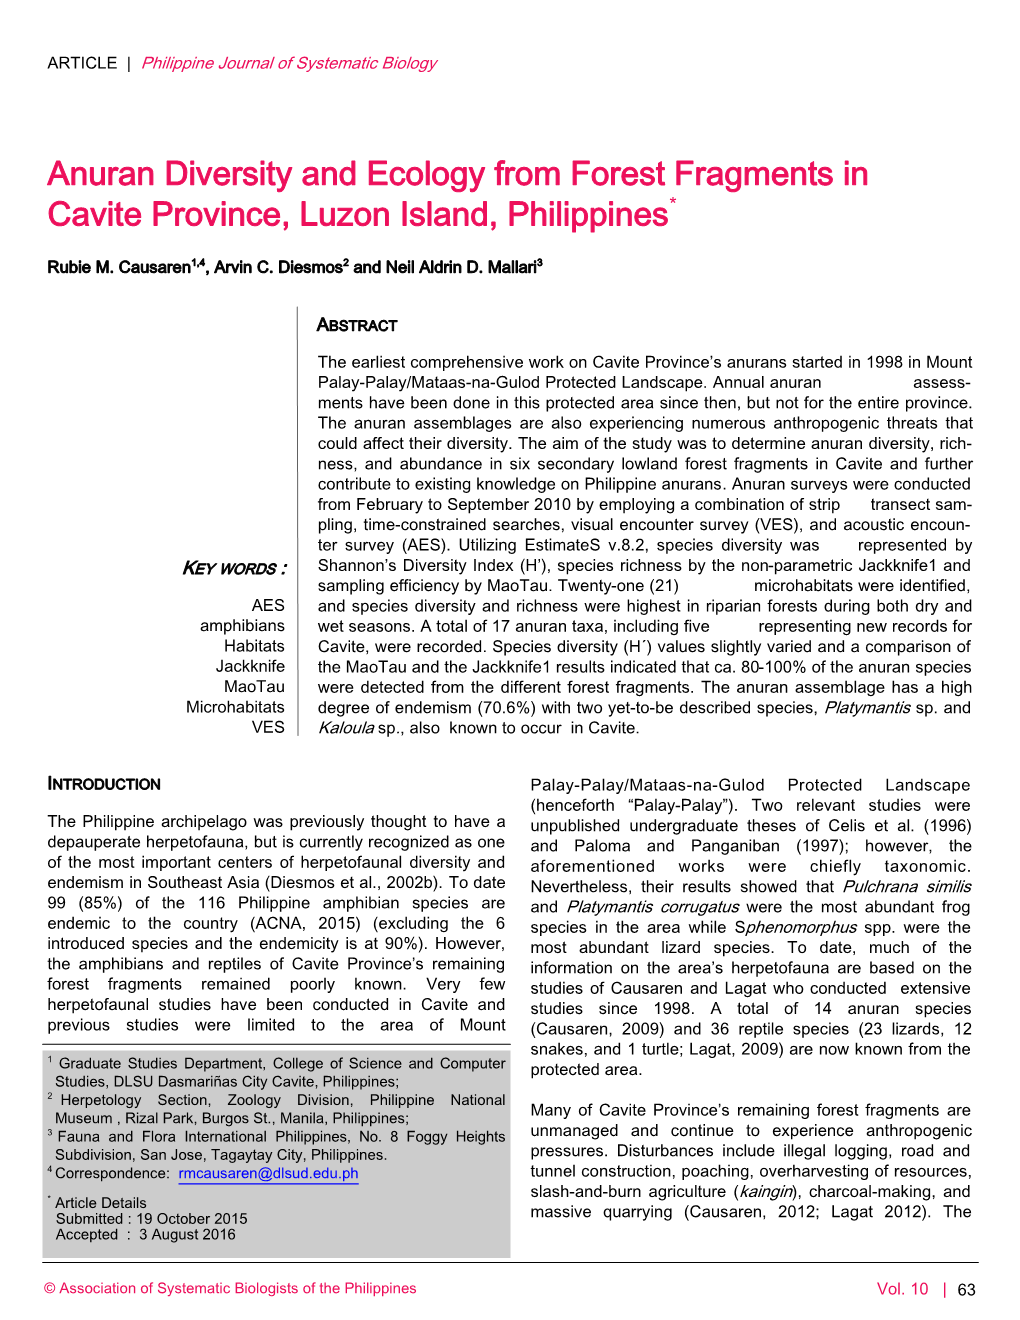 Anuran Diversity and Ecology from Forest Fragments in Cavite Province, Luzon Island, Philippines*